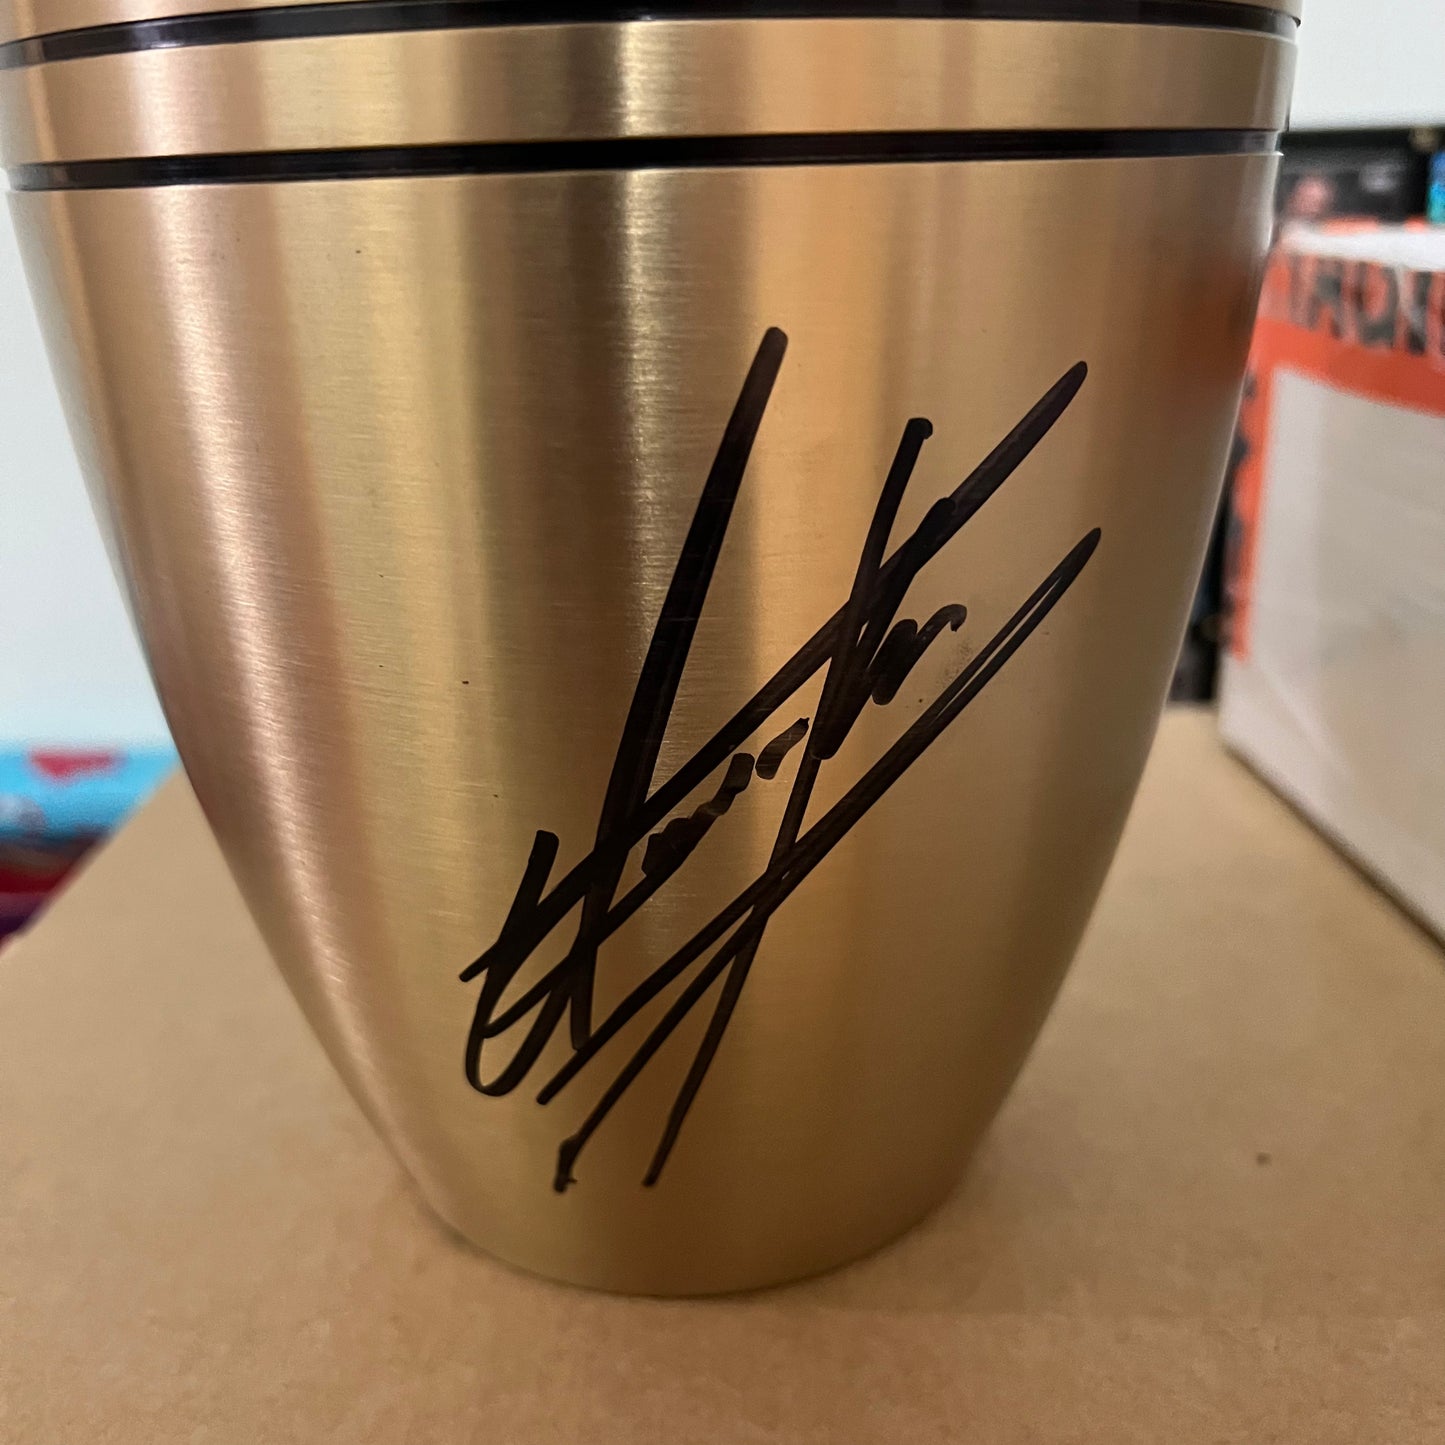 WWE Undertaker Autographed Signed Urn with JSA Certification Collectable